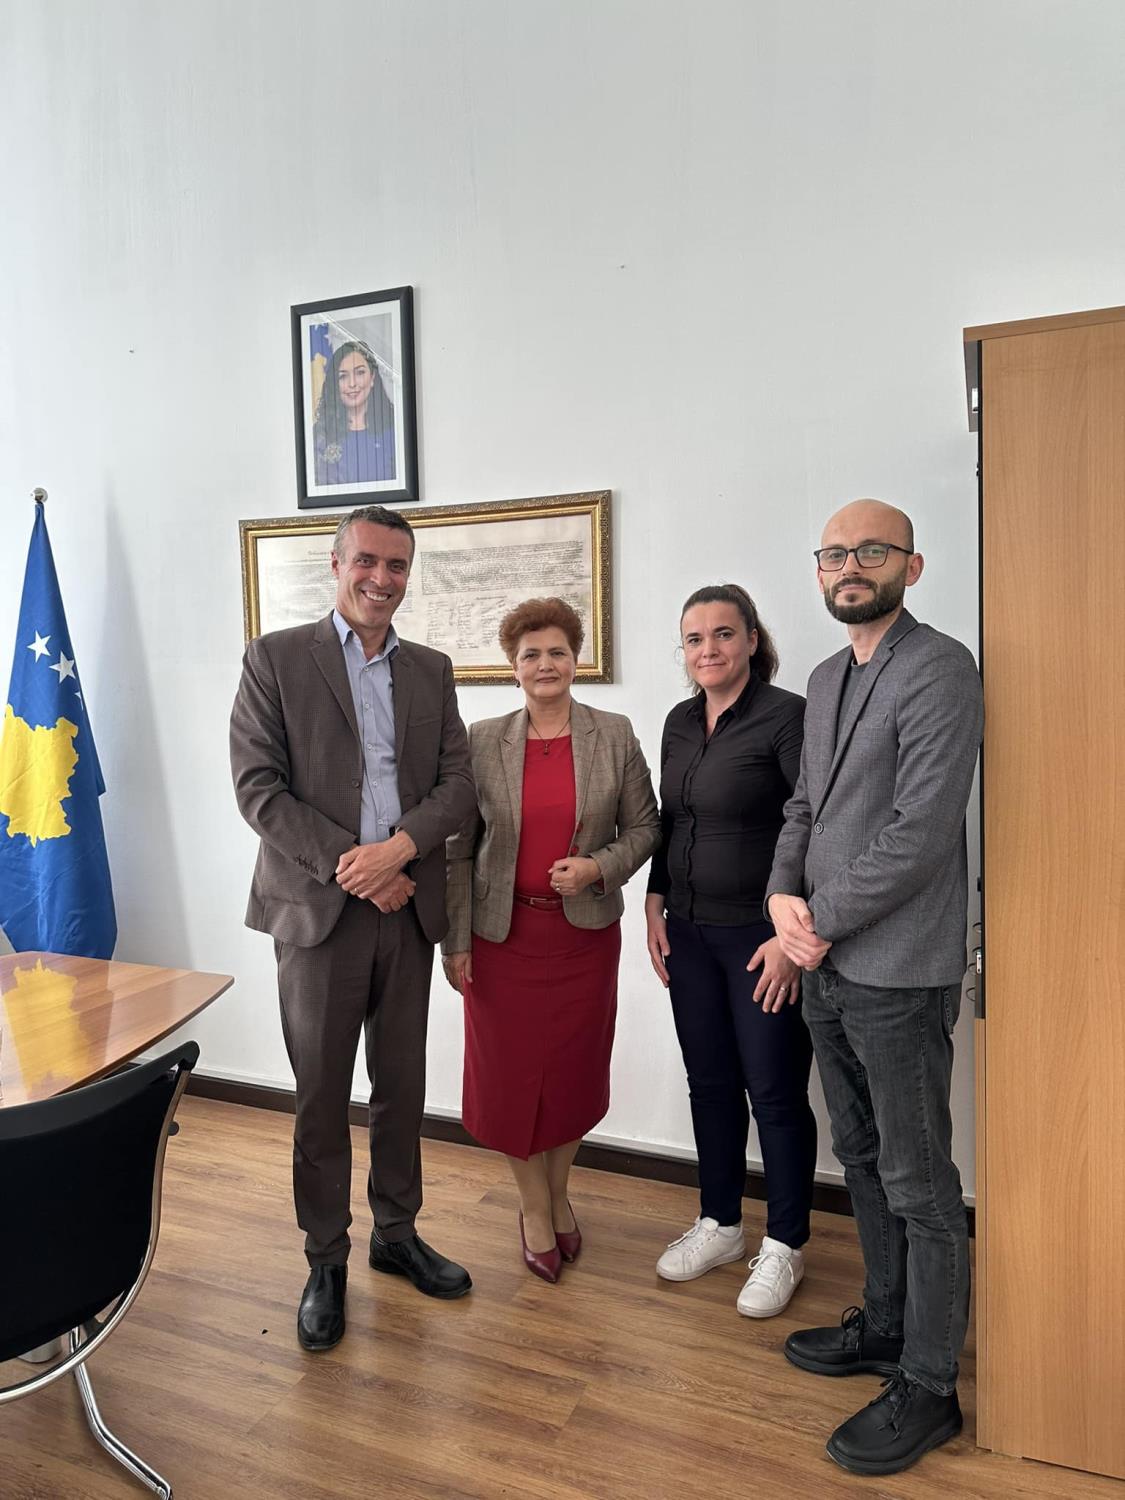 Meeting with the Head of ARBK -